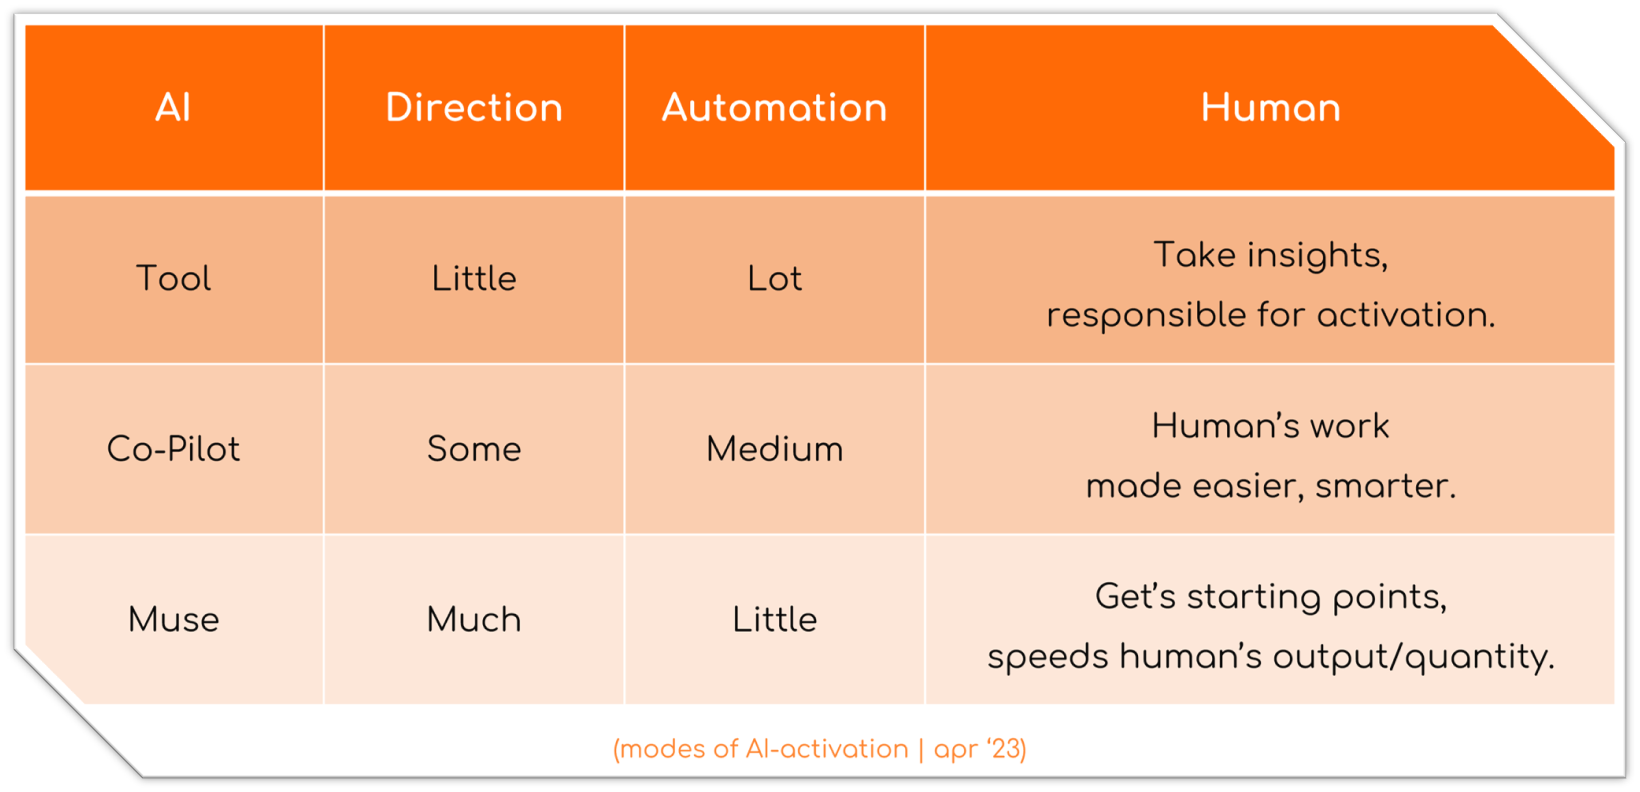 Categorizing AI for your uses